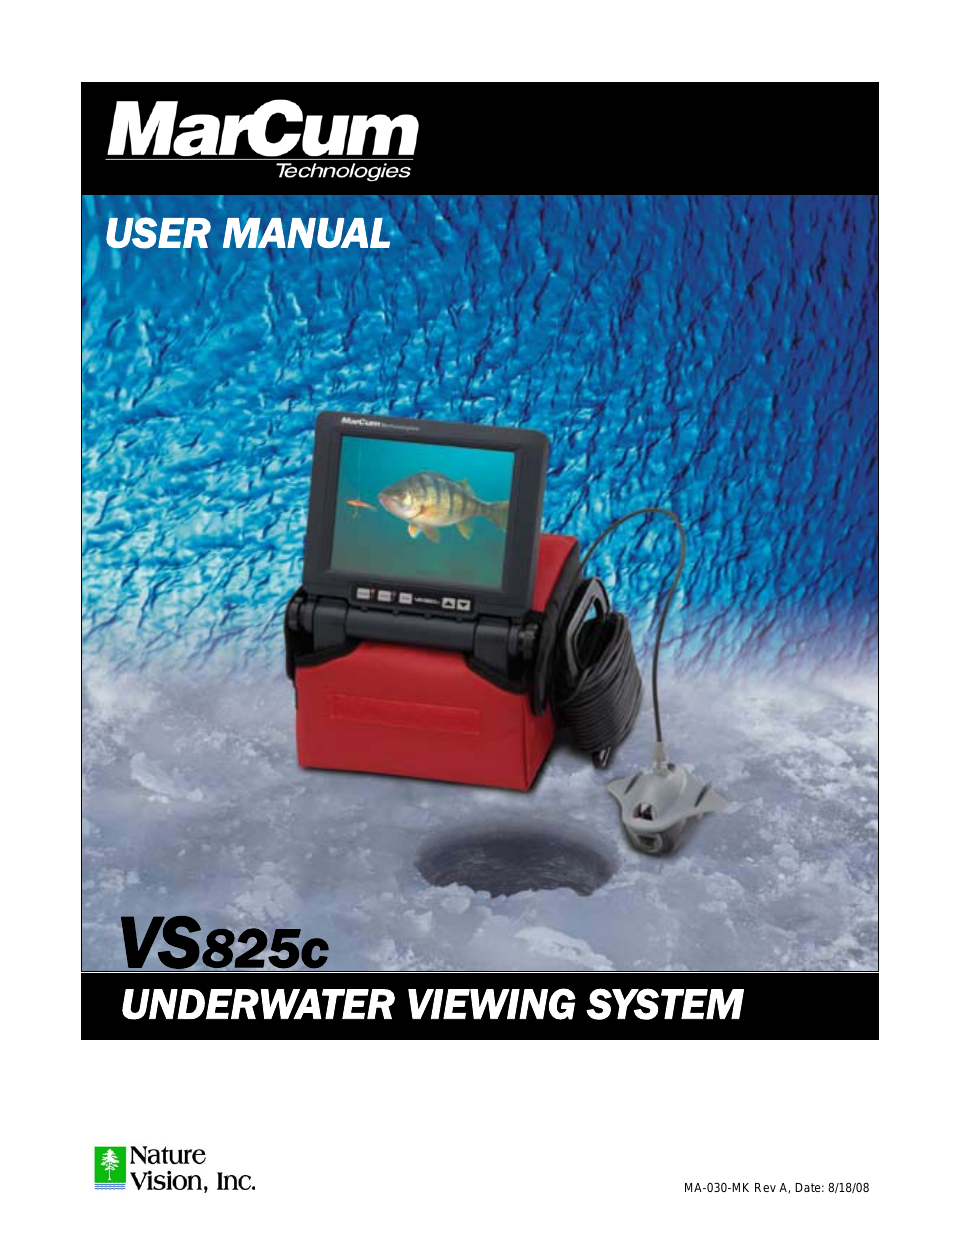 Underwater Viewing System VS825